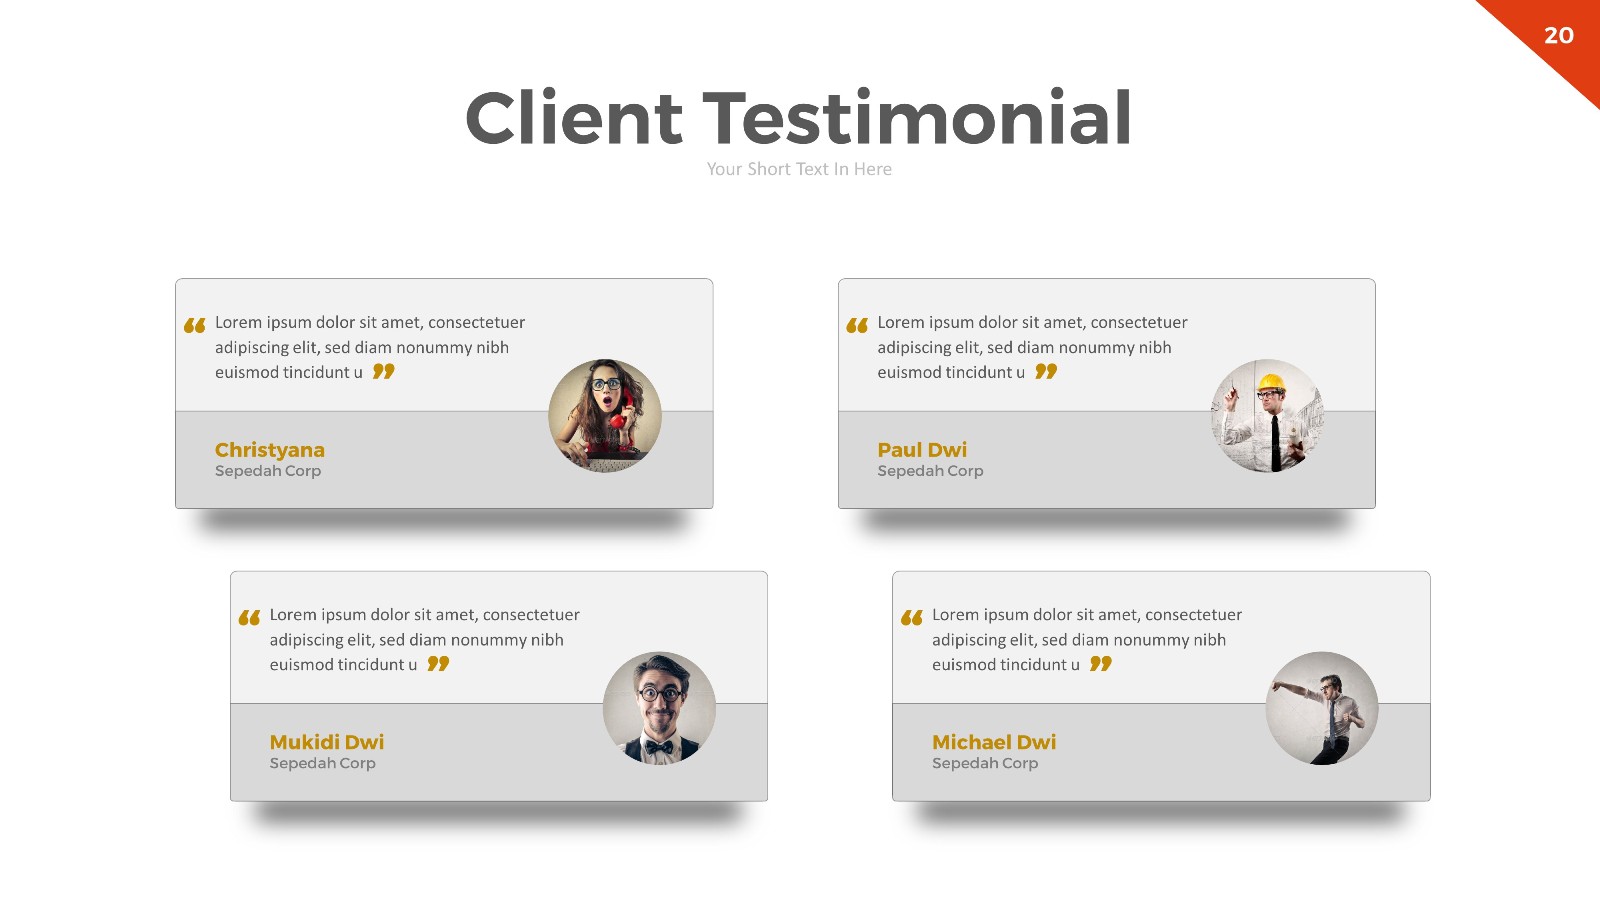 Testimony PowerPoint Template by RRgraph | GraphicRiver